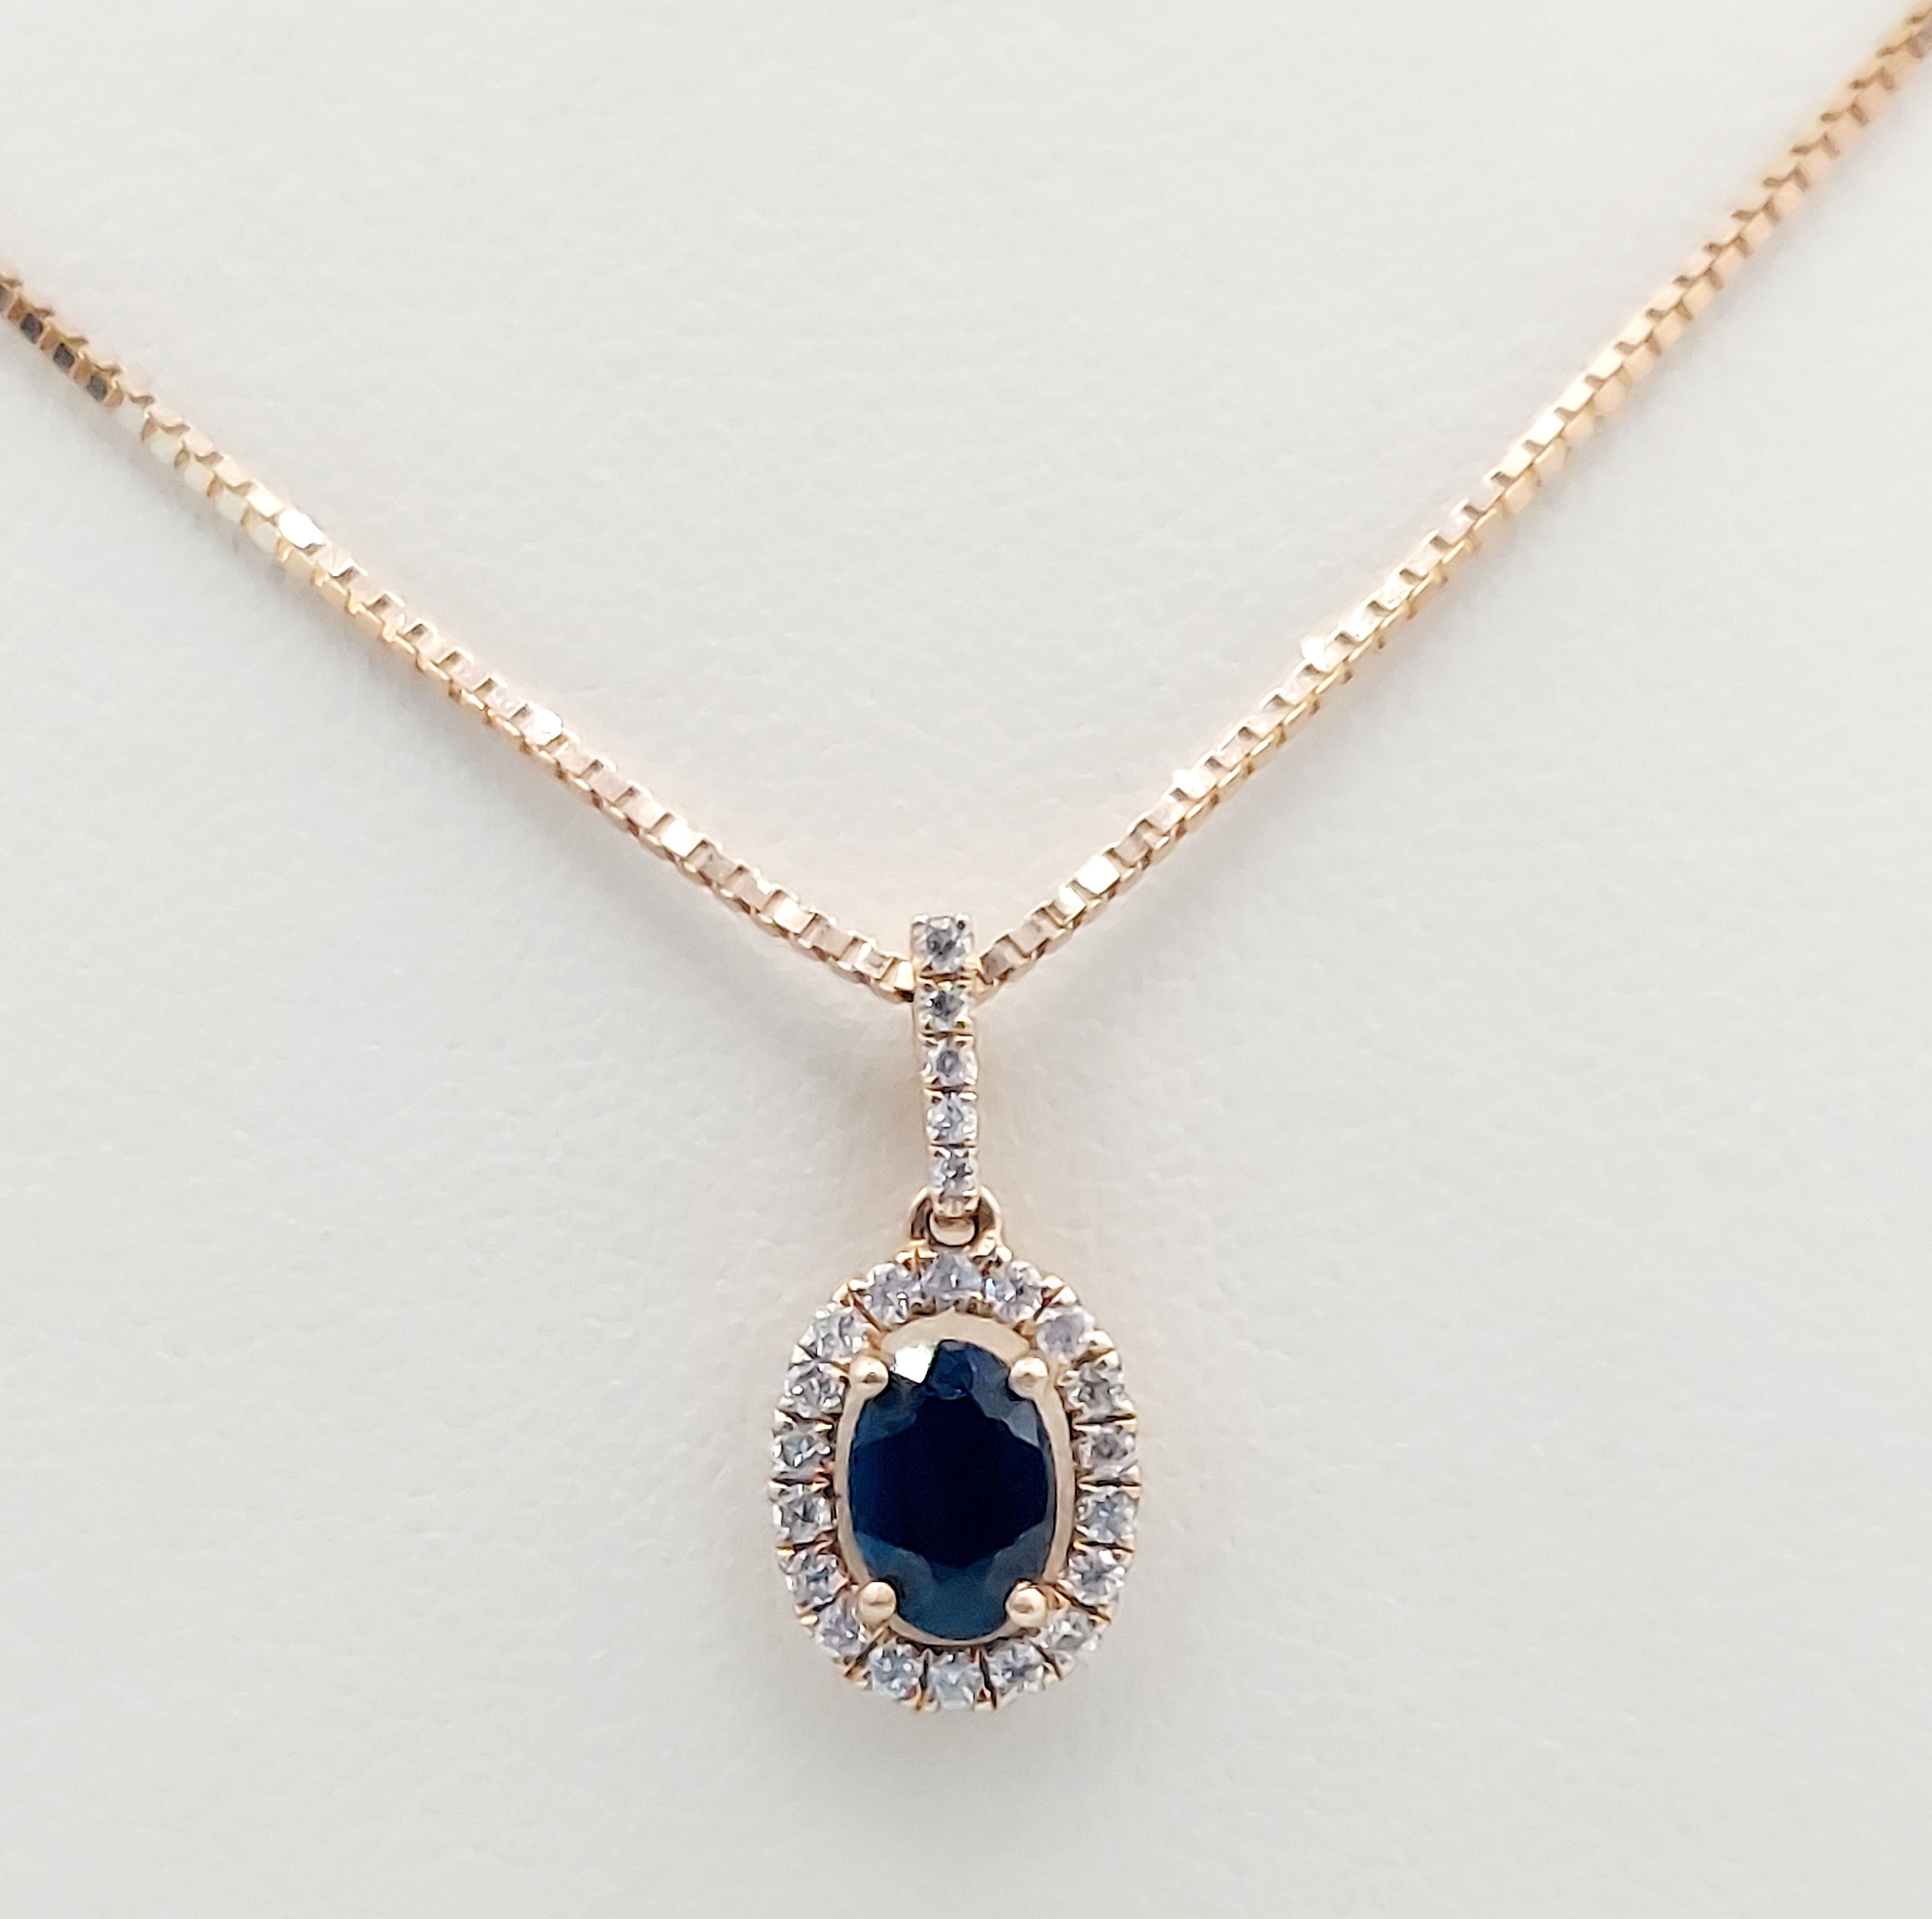 Oval Solitaire Sapphire Pendant in 18k White Gold (7x5mm)